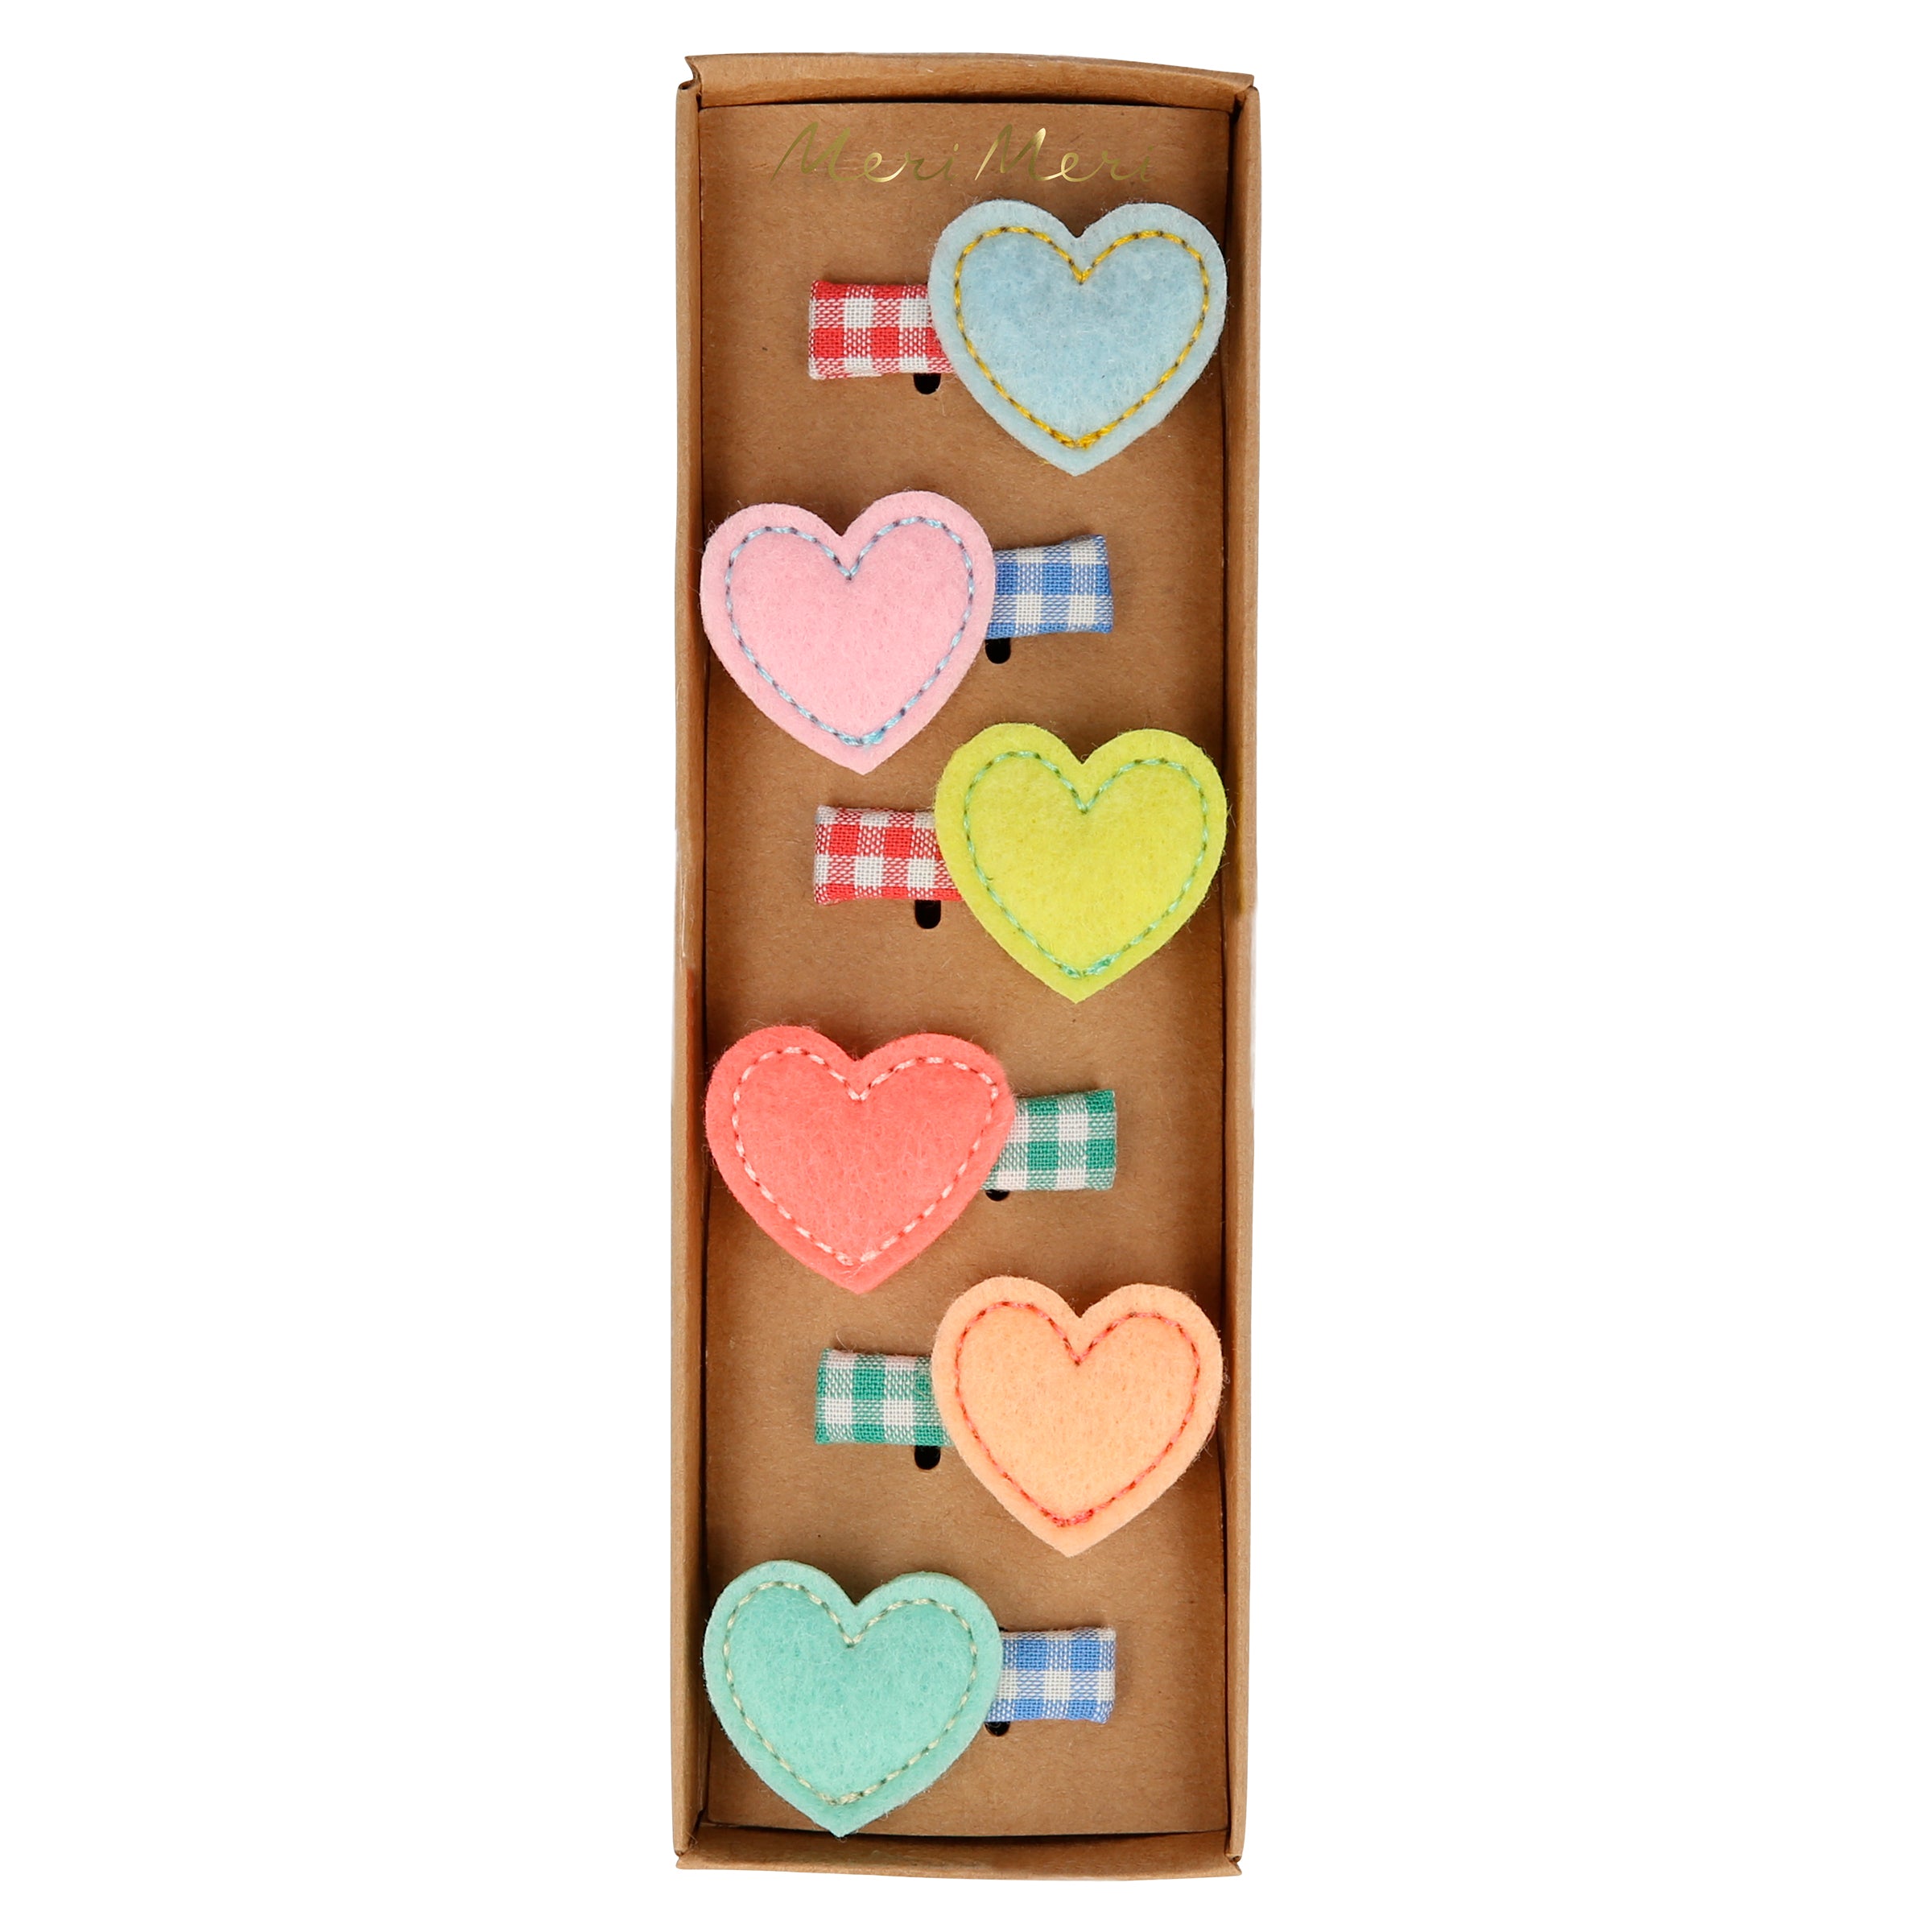 Our hair accessories for kids set includes colourful hearts and gingham ribbons, perfect for Valentine's Day gifts for kids.